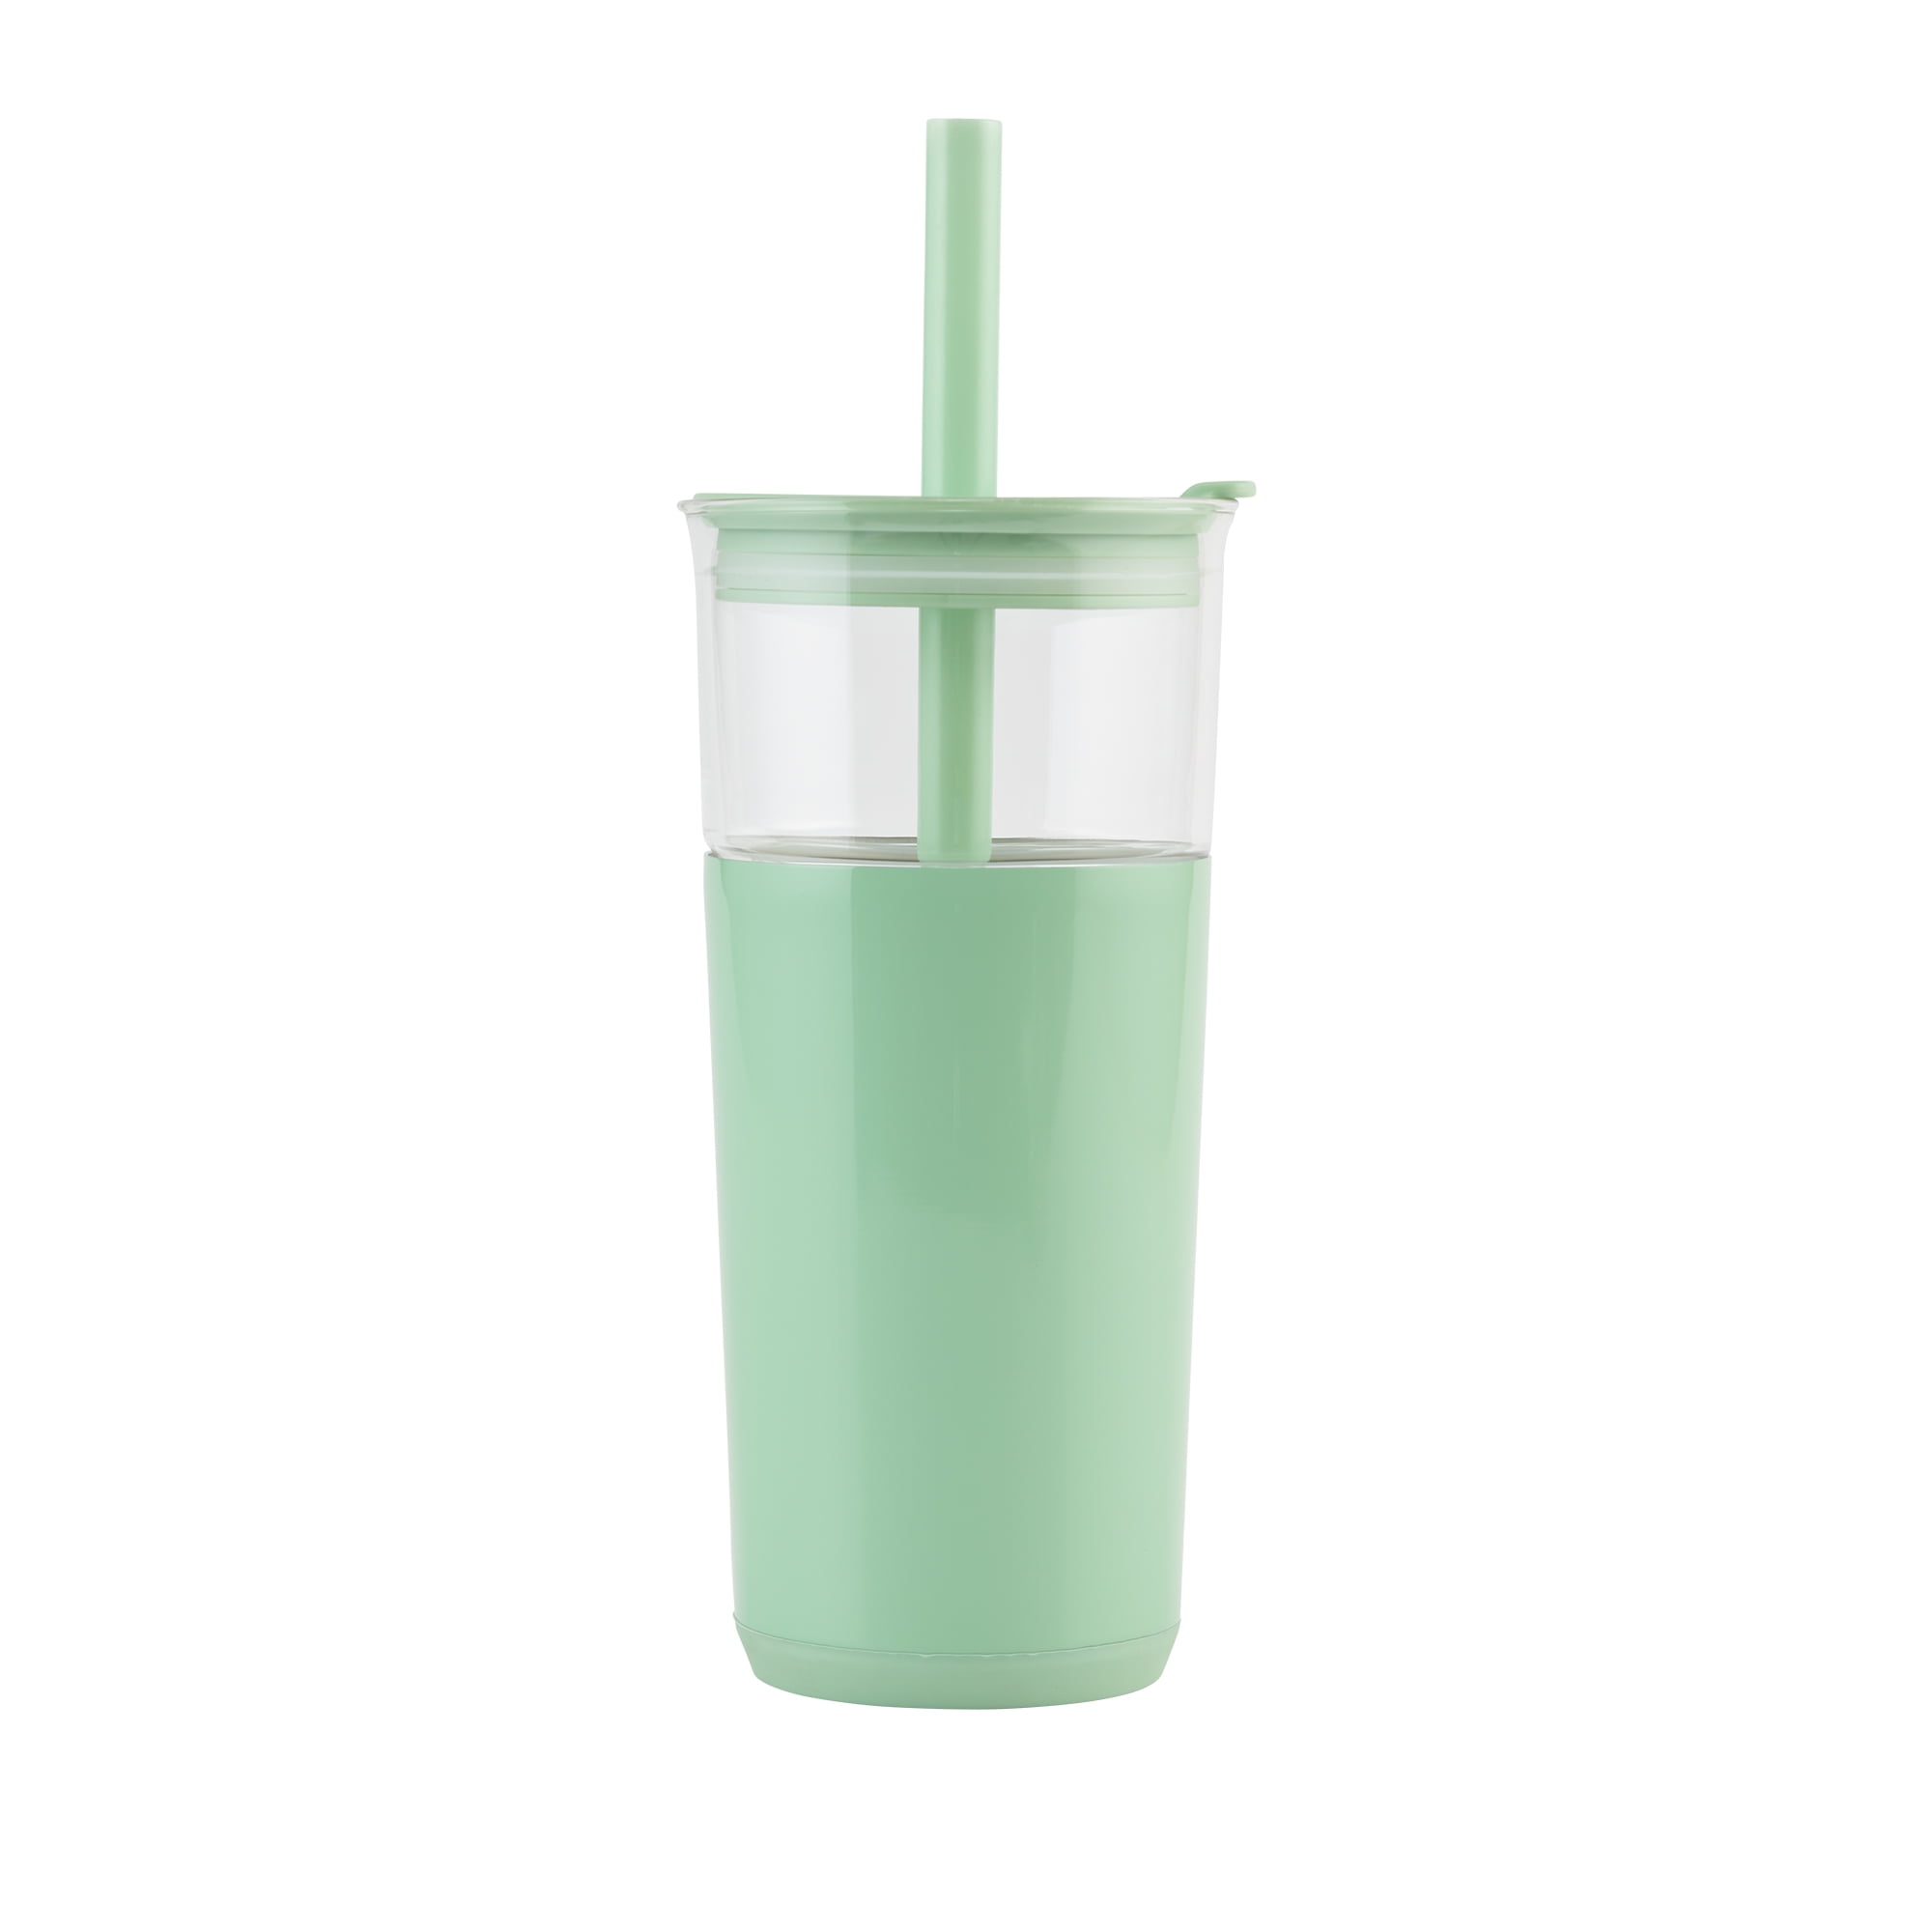 UPKOCH 2 Pcs Glass Tumbler with Lid and Straw, 16oz Tumbler Water Glass,  Thick Wall Glass Cup with S…See more UPKOCH 2 Pcs Glass Tumbler with Lid  and